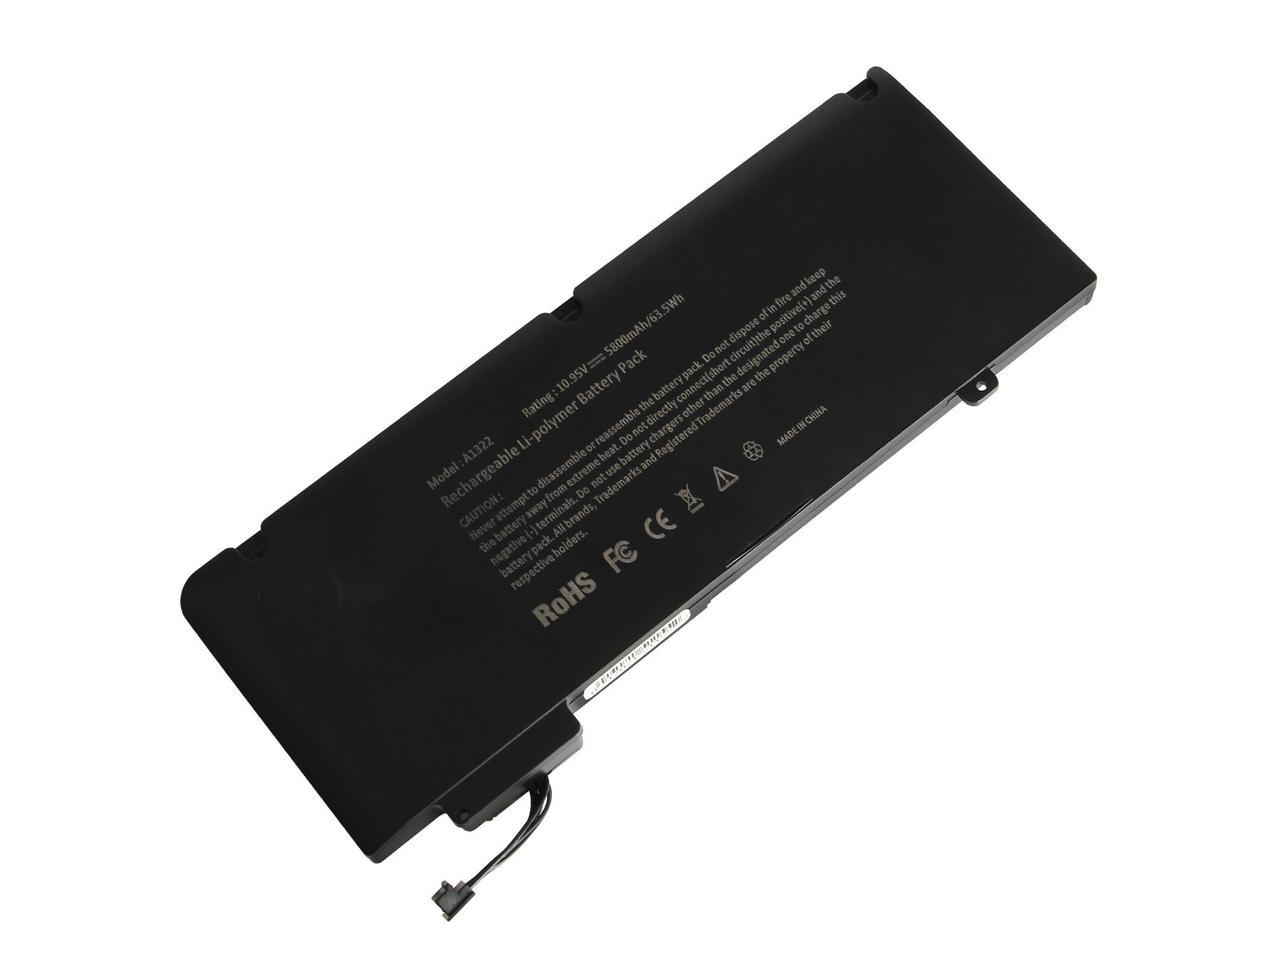 macbook pro 13 mid 2010 battery replacement